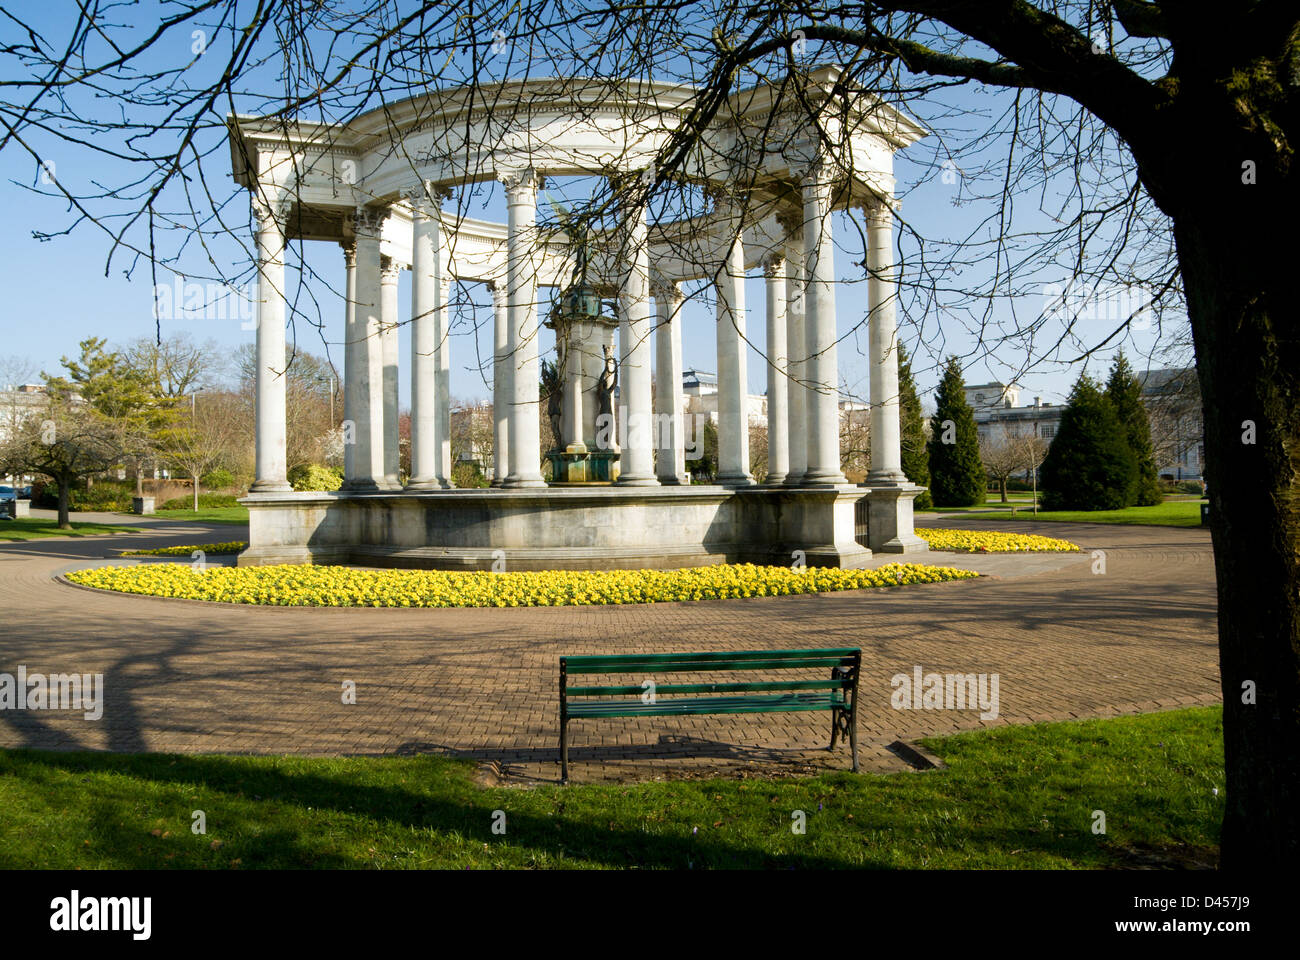 Wales National War Memorial, Alexandra gardens, Cathay's Park, Cardiff, Pays de Galles, Royaume-Uni. Banque D'Images